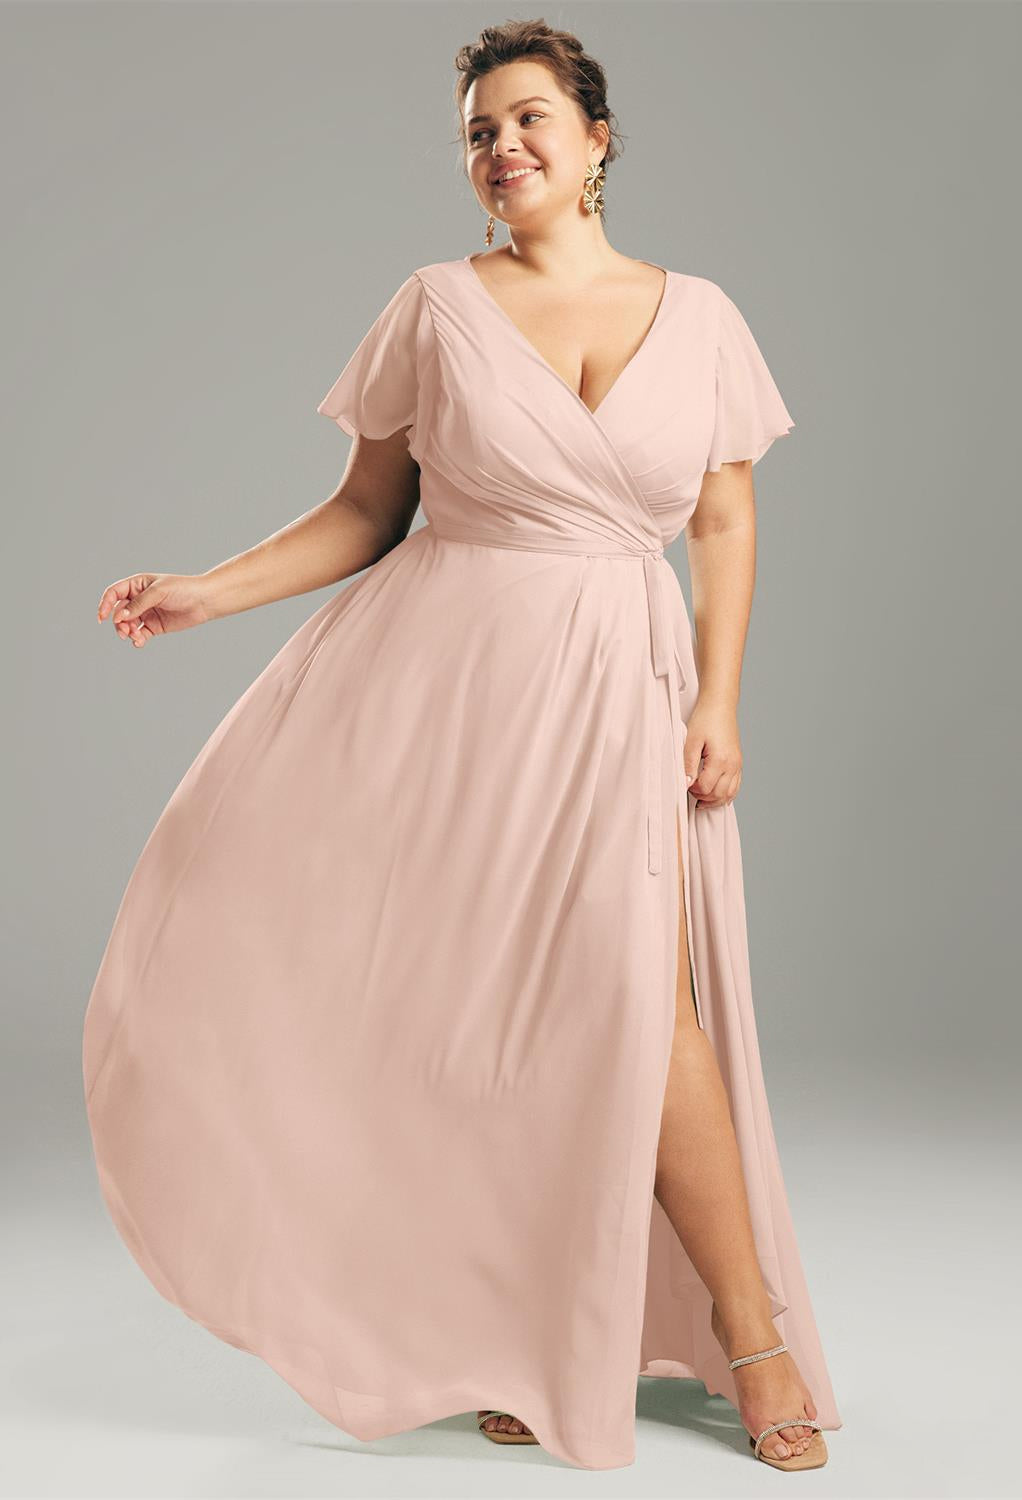 An Ellison - Chiffon Bridesmaid Dress - Off The Rack with a v-neck and slit available at Bergamot Bridal.